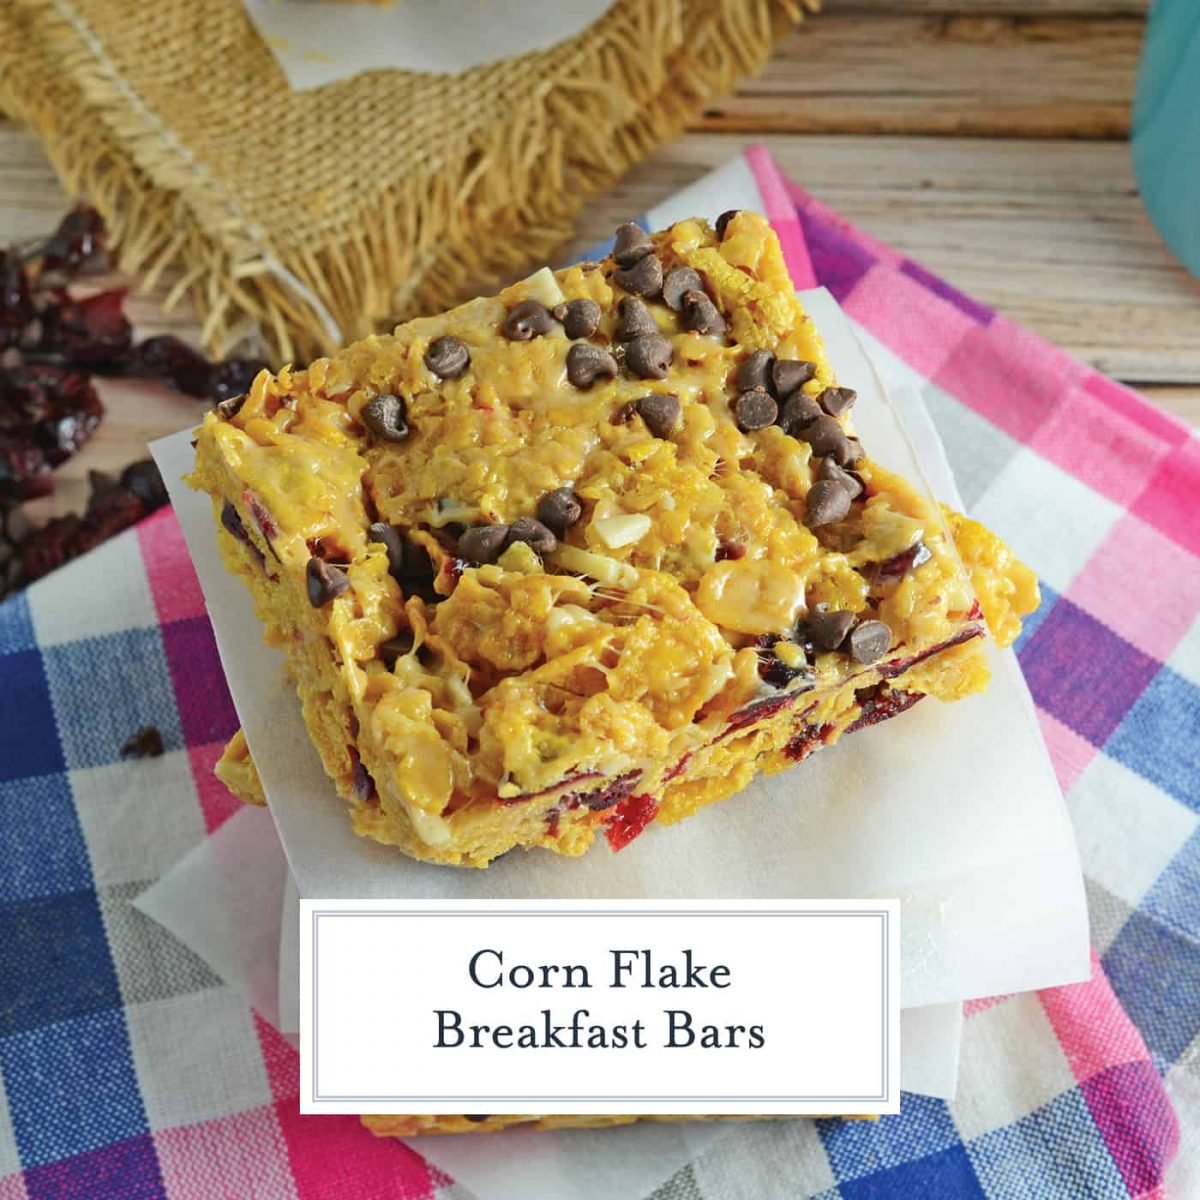 Corn Flake Breakfast Bars are a 15-minute handheld breakfast bar made from corn flakes, dried cranberries, slivered almonds, peanut butter, mini chocolate chips and marshmallows. #breakfastbars #makeaheadbreakfast www.savoryexperiments.com